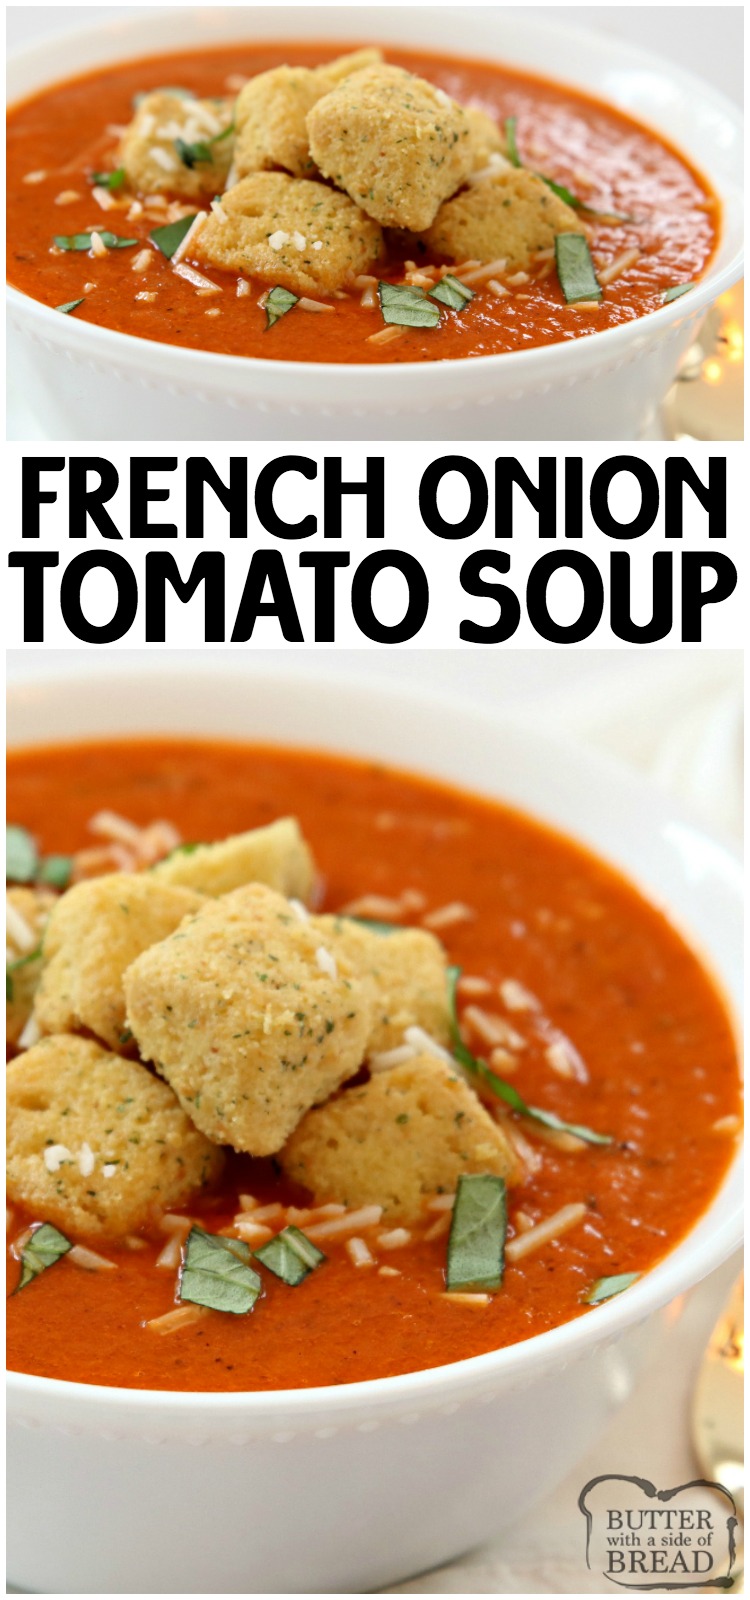 French Onion Tomato Soup combines two favorites in an easy to make, delicious tomato soup. Tomatoes, sweet onion, butter and broth blend together in this flavorful homemade tomato soup recipe perfect for weeknight dinner. #soup #tomato #frenchonion #onion #recipe #lunch #dinner #food from BUTTER WITH A SIDE OF BREAD